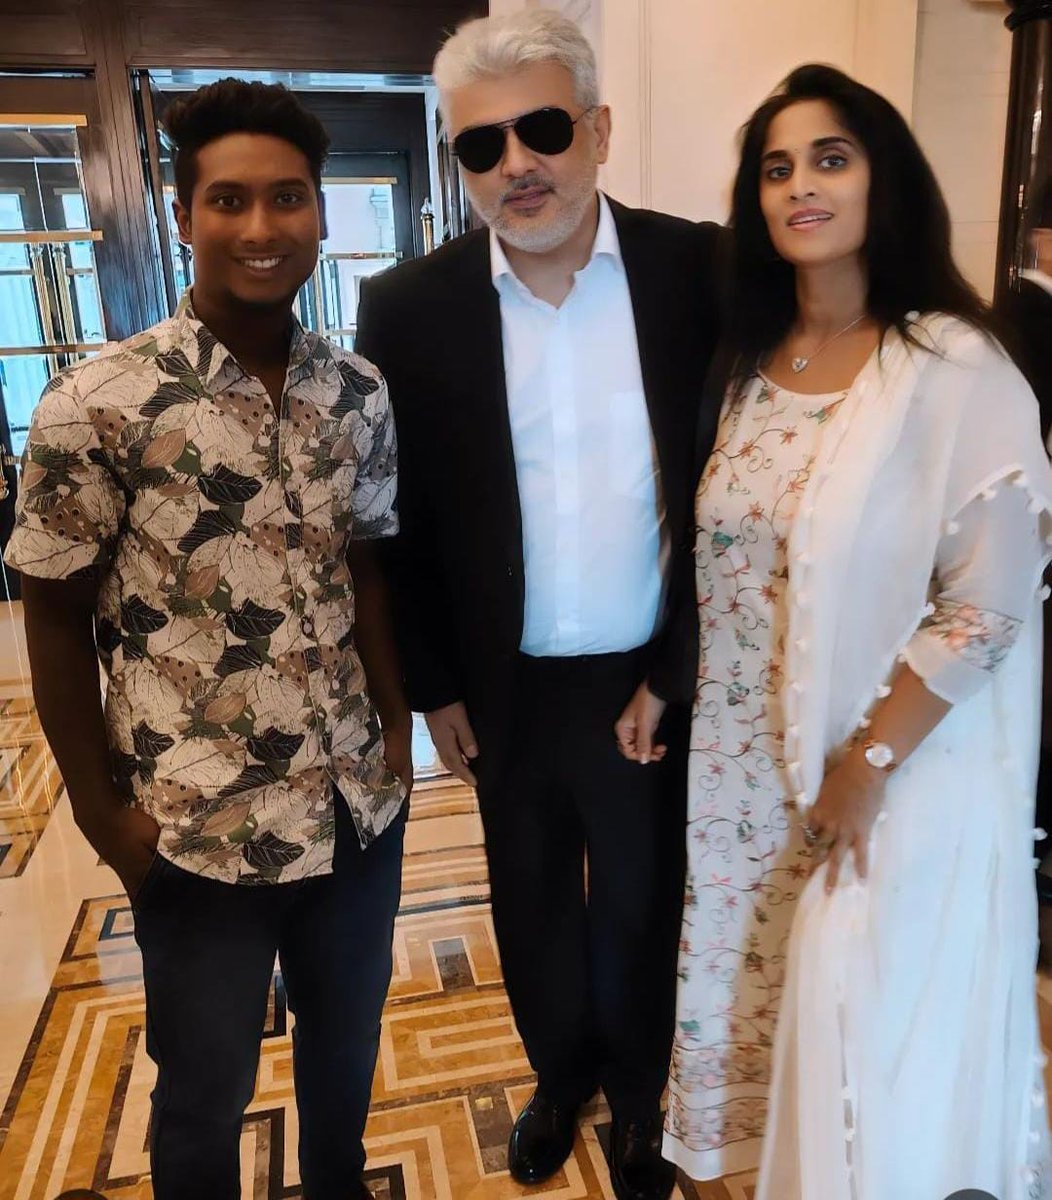 Mr. & Mrs. #AK Wedding Anniversary click with a fan 😍